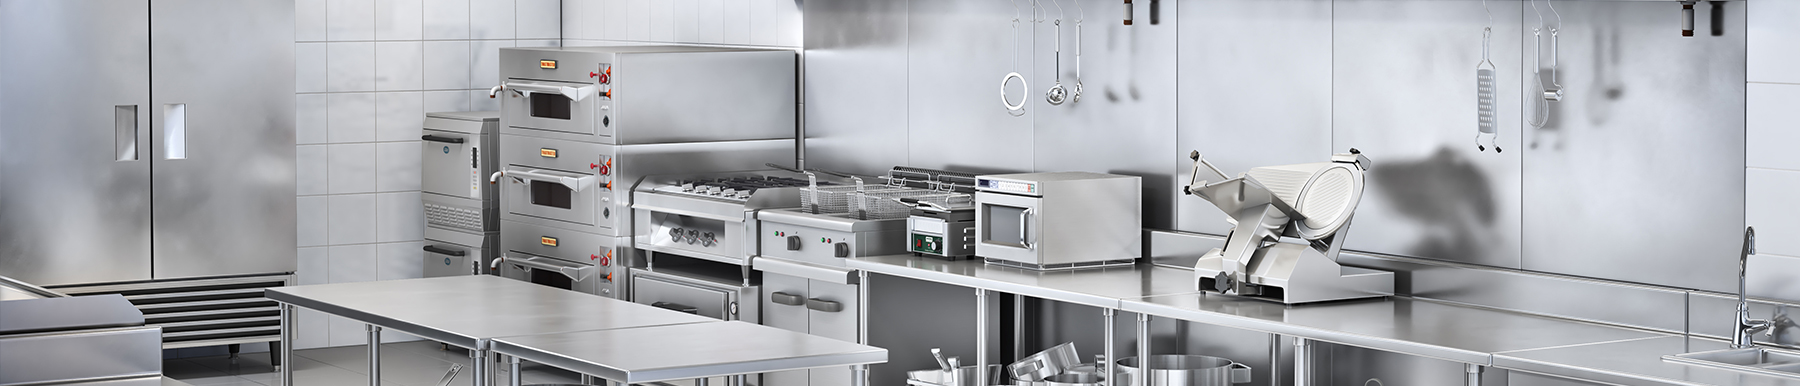 Catering Equipment Suppliers Near Sefton | H2 Catering Equipment Catering Equipment